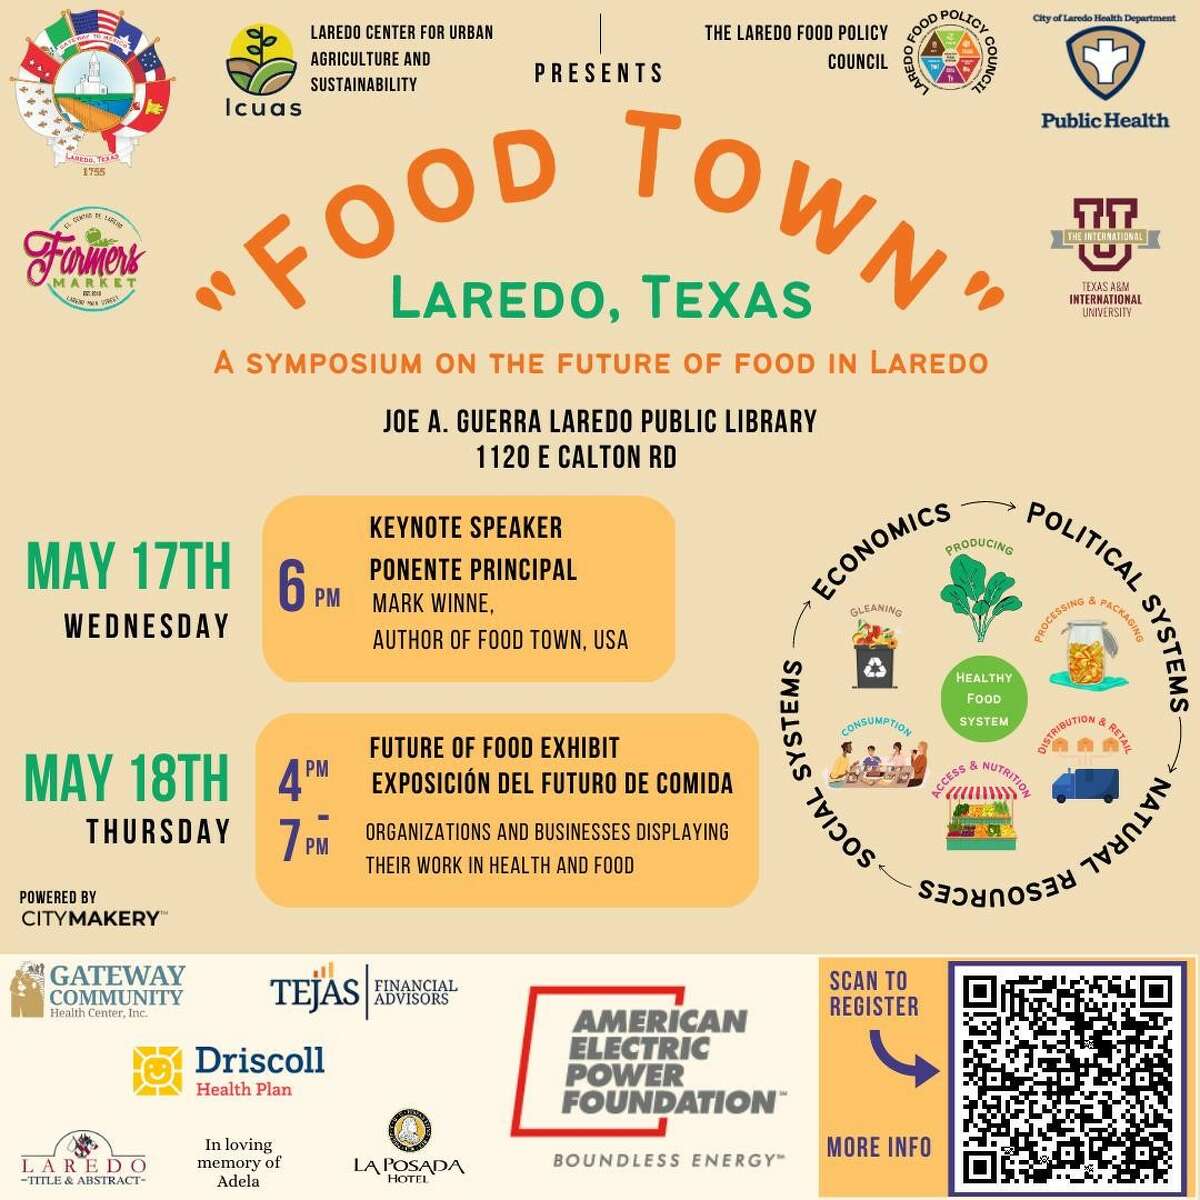 This flyer shows the event information for the "Food Town" symposium on the future of food in Laredo. 